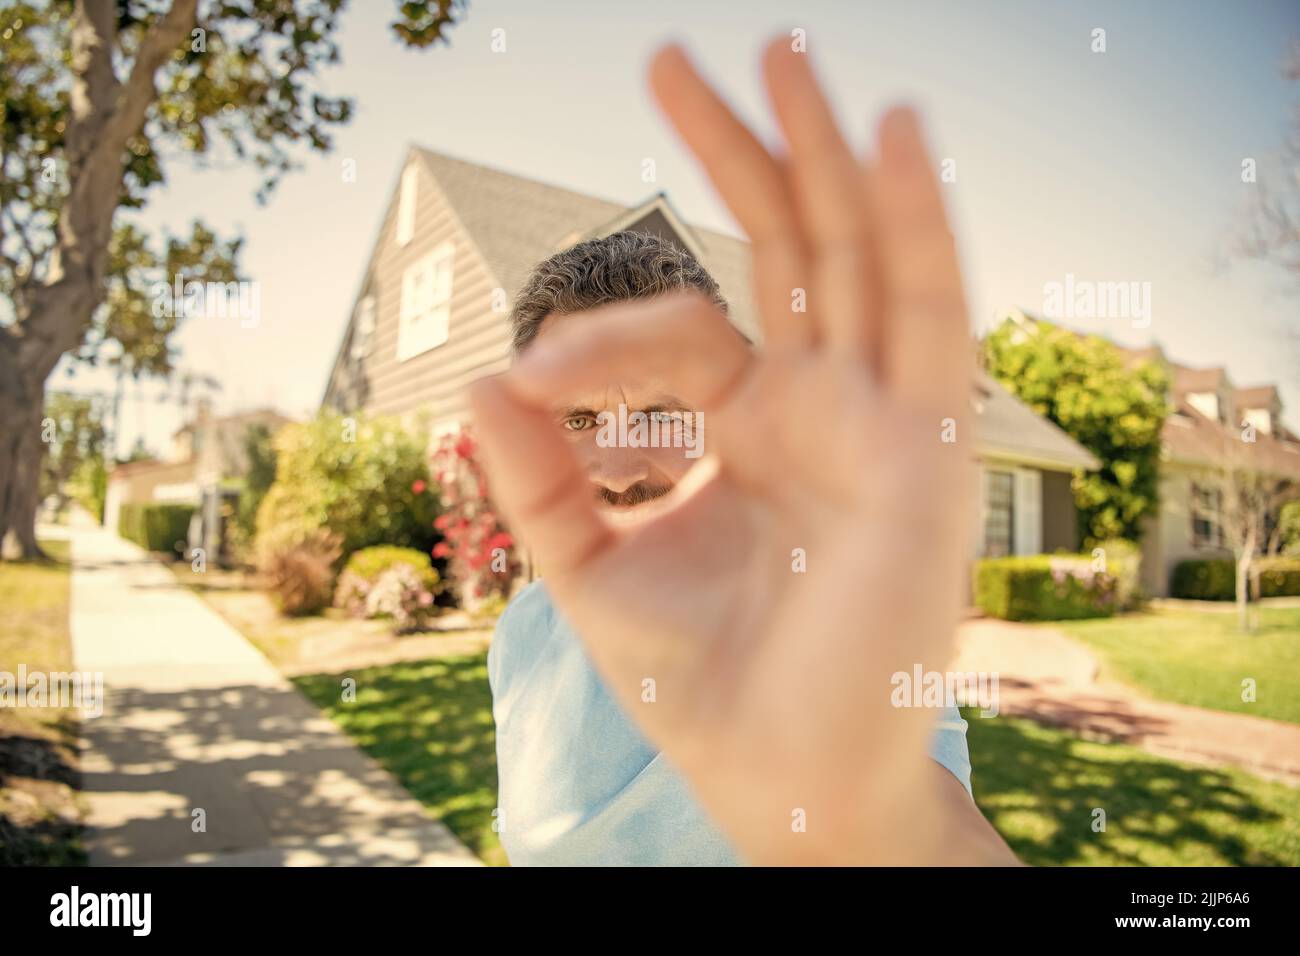 ok gesture. real estate agent at house for sale. realtor welcoming visitors. Stock Photo